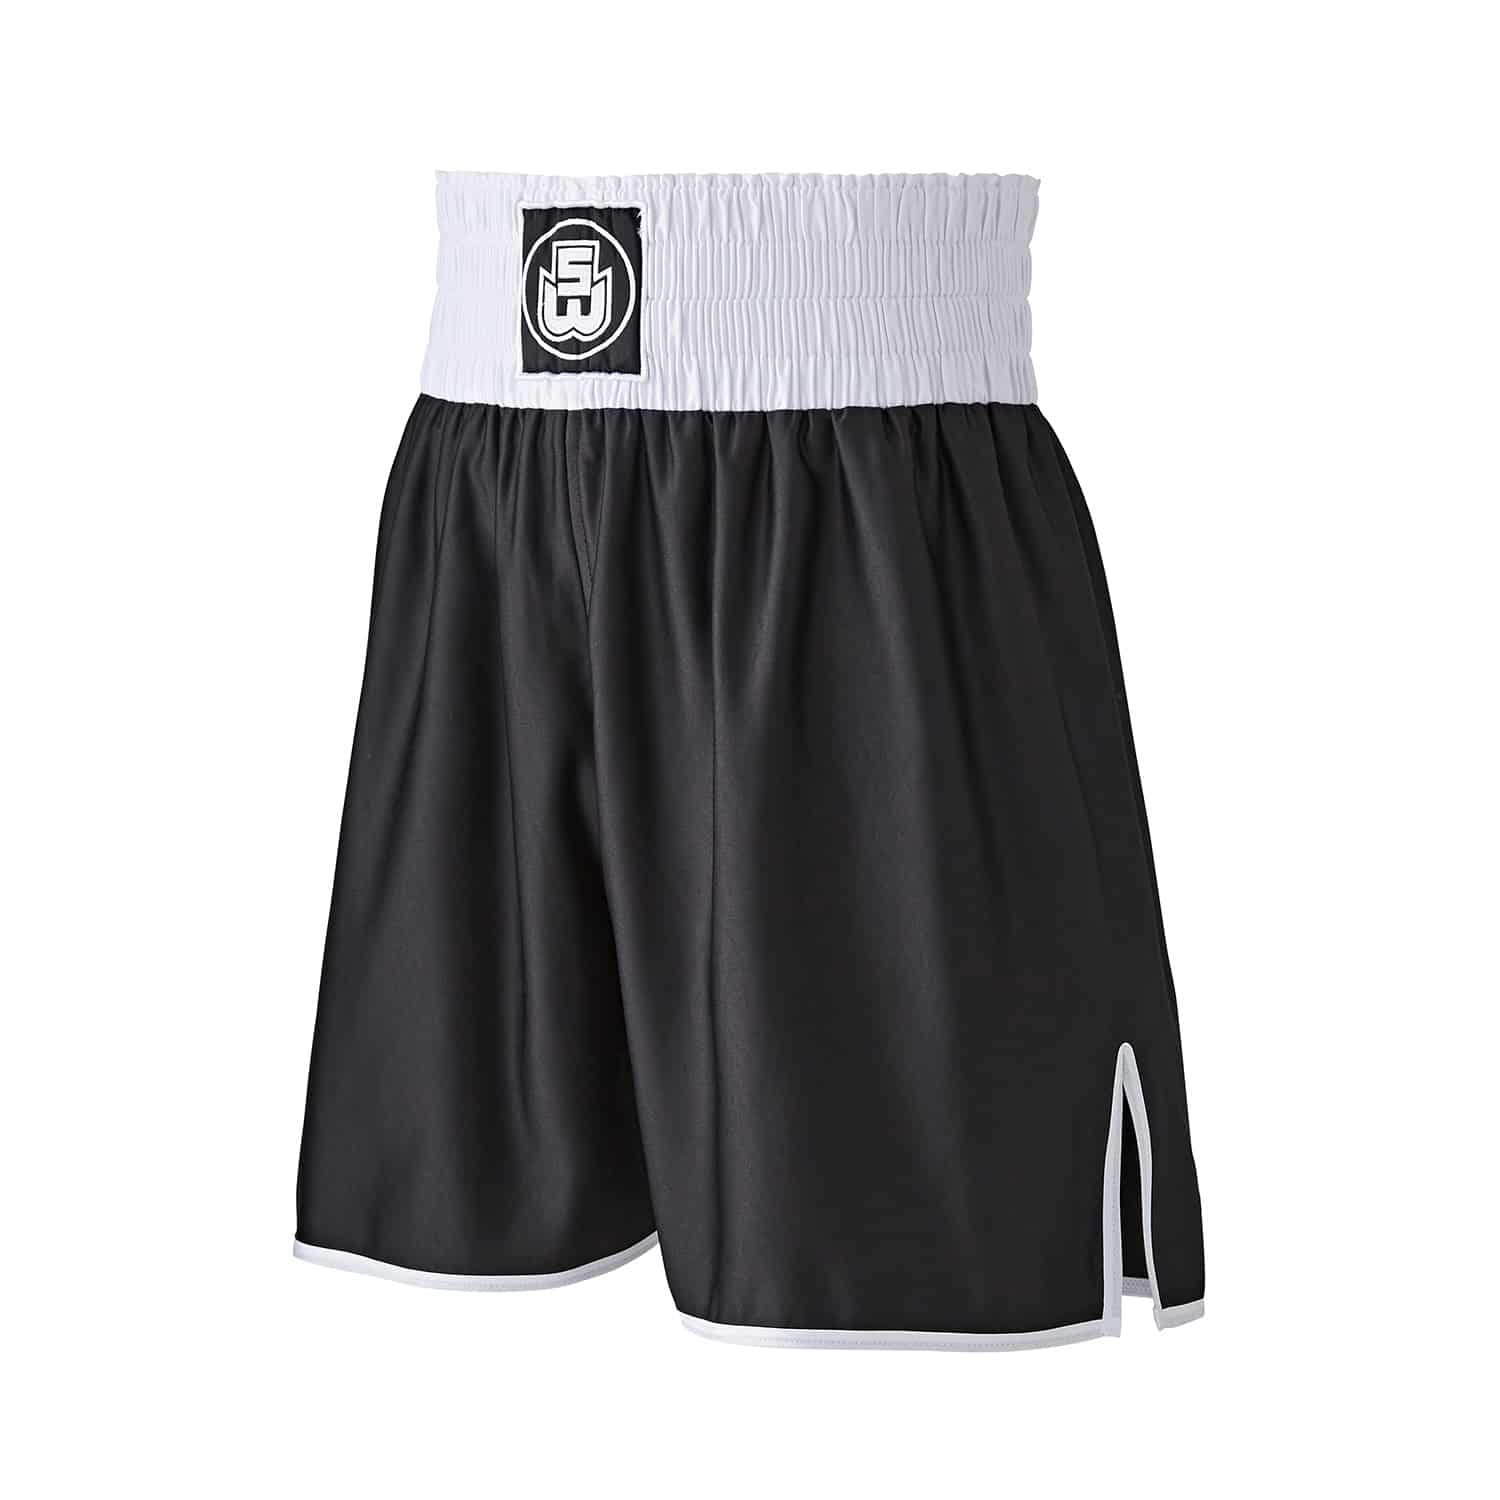 Sports shorts in white and black colors Royalty Free Vector